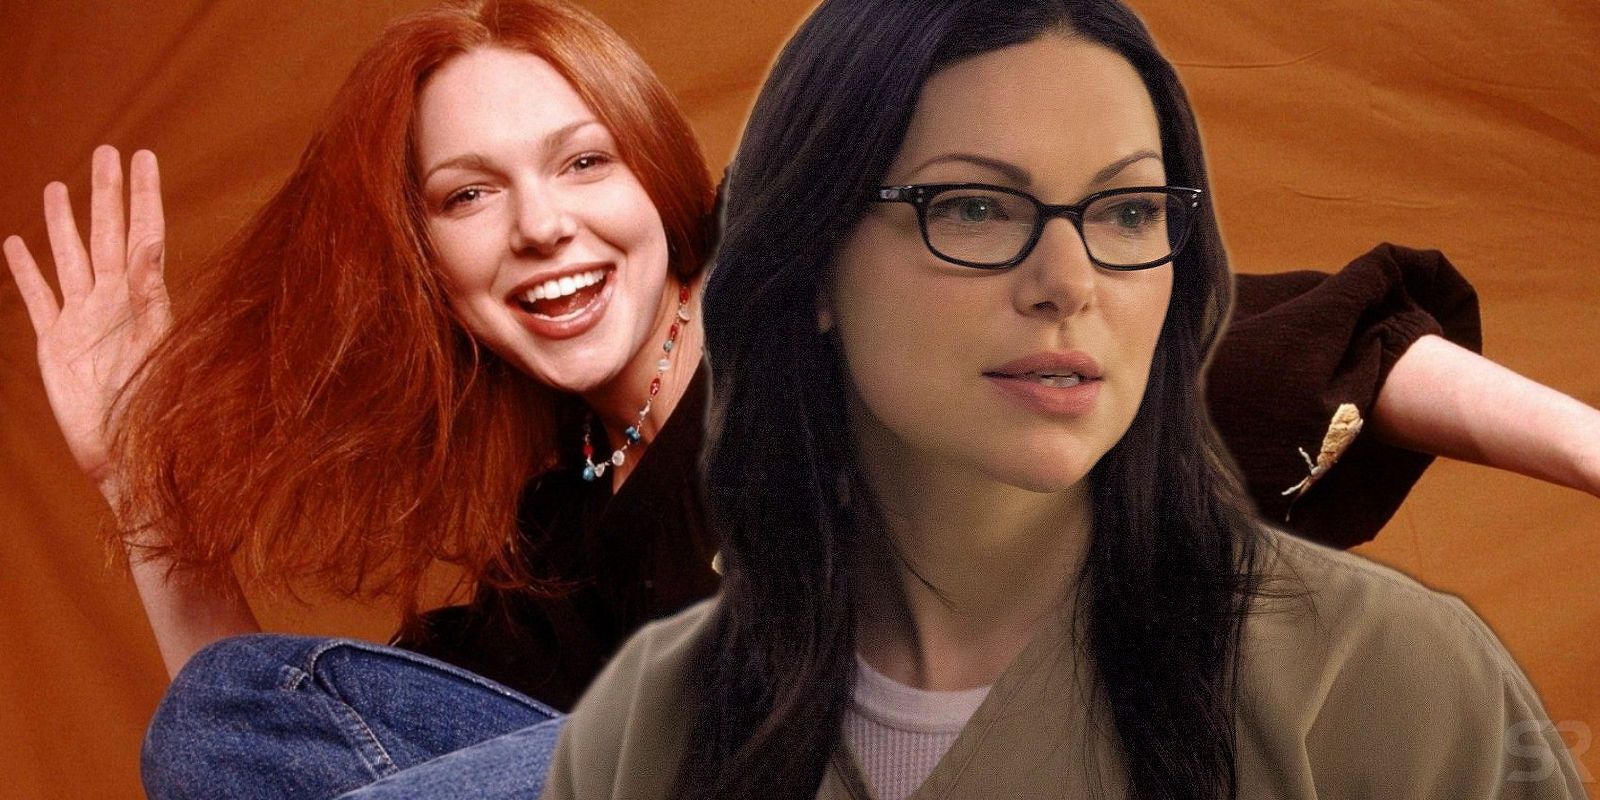 Laura Prepon in That '70s Show and Orange is the New Black